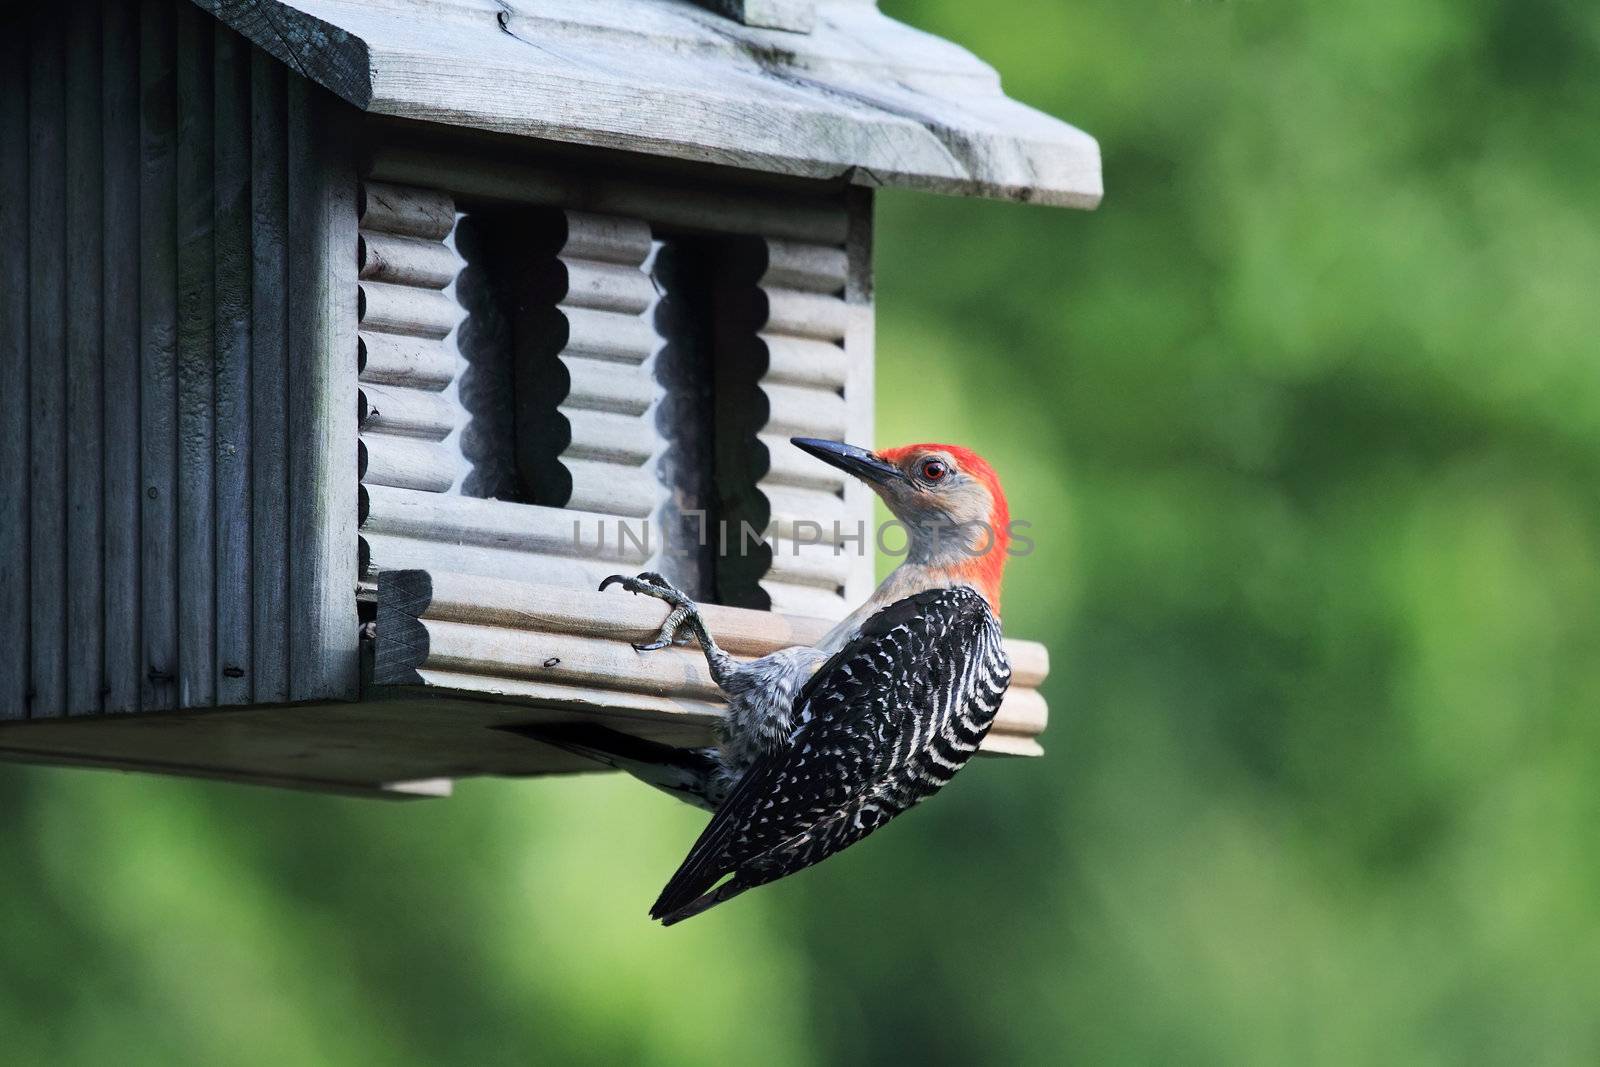 Red-bellied Woodpecker feeding at a bird feeder. Extreme shallow depth of field.